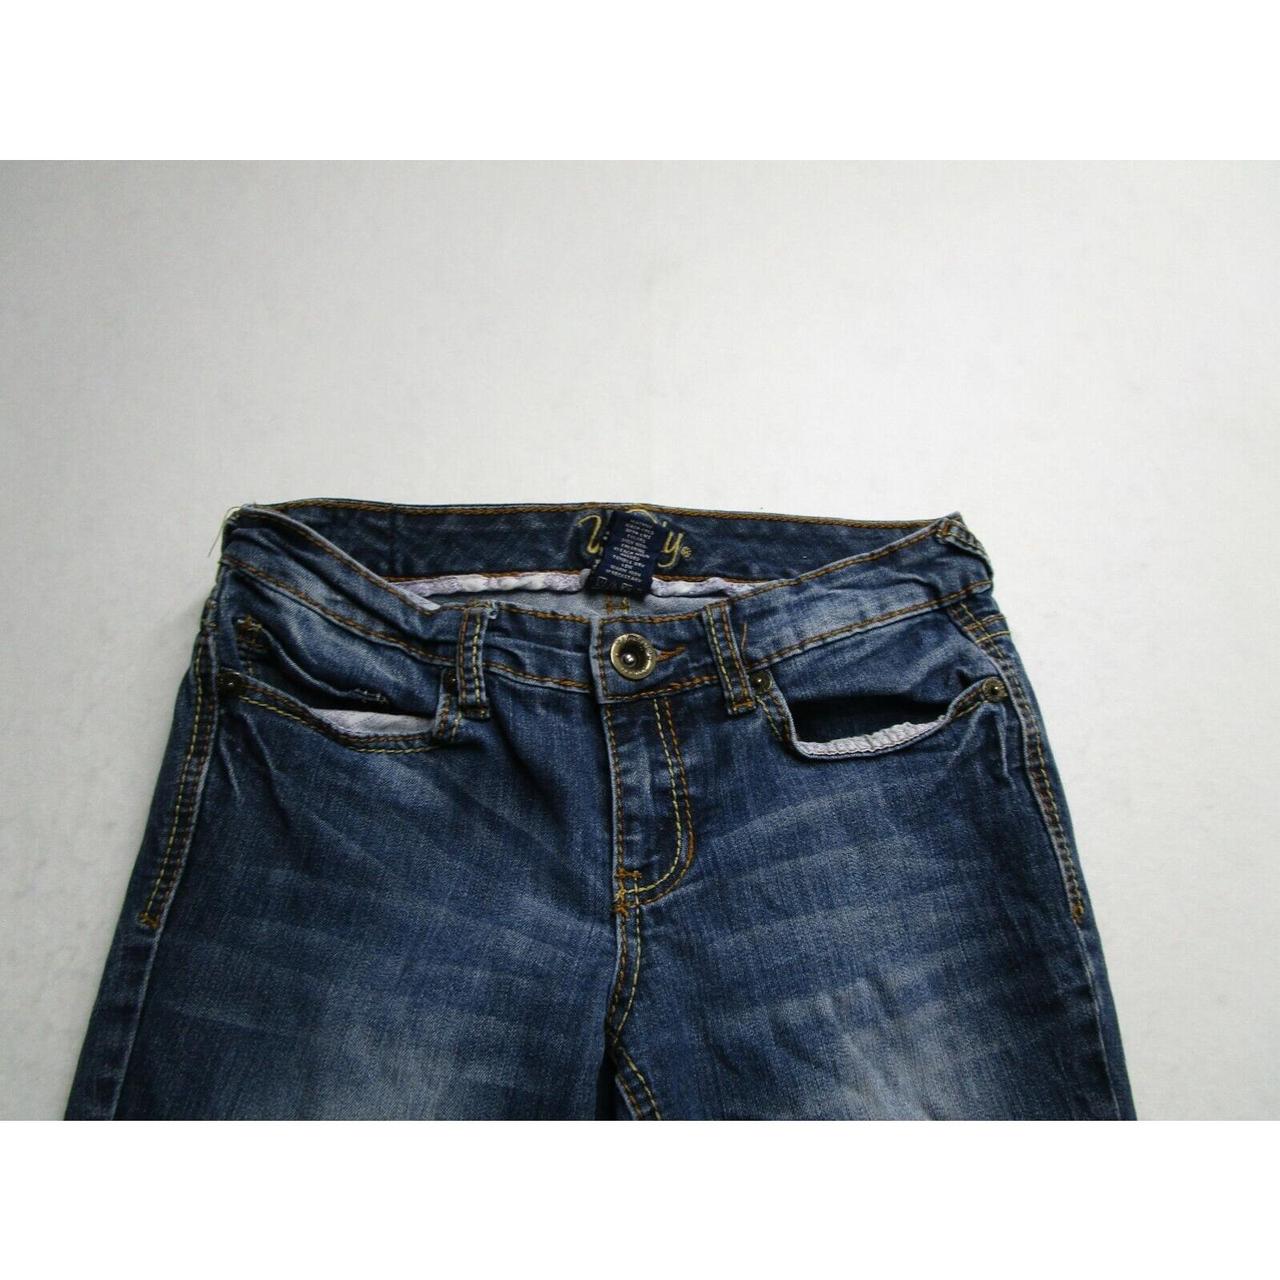 Product Image 2 - Vanity Jeans Women’s 28x26 Flared